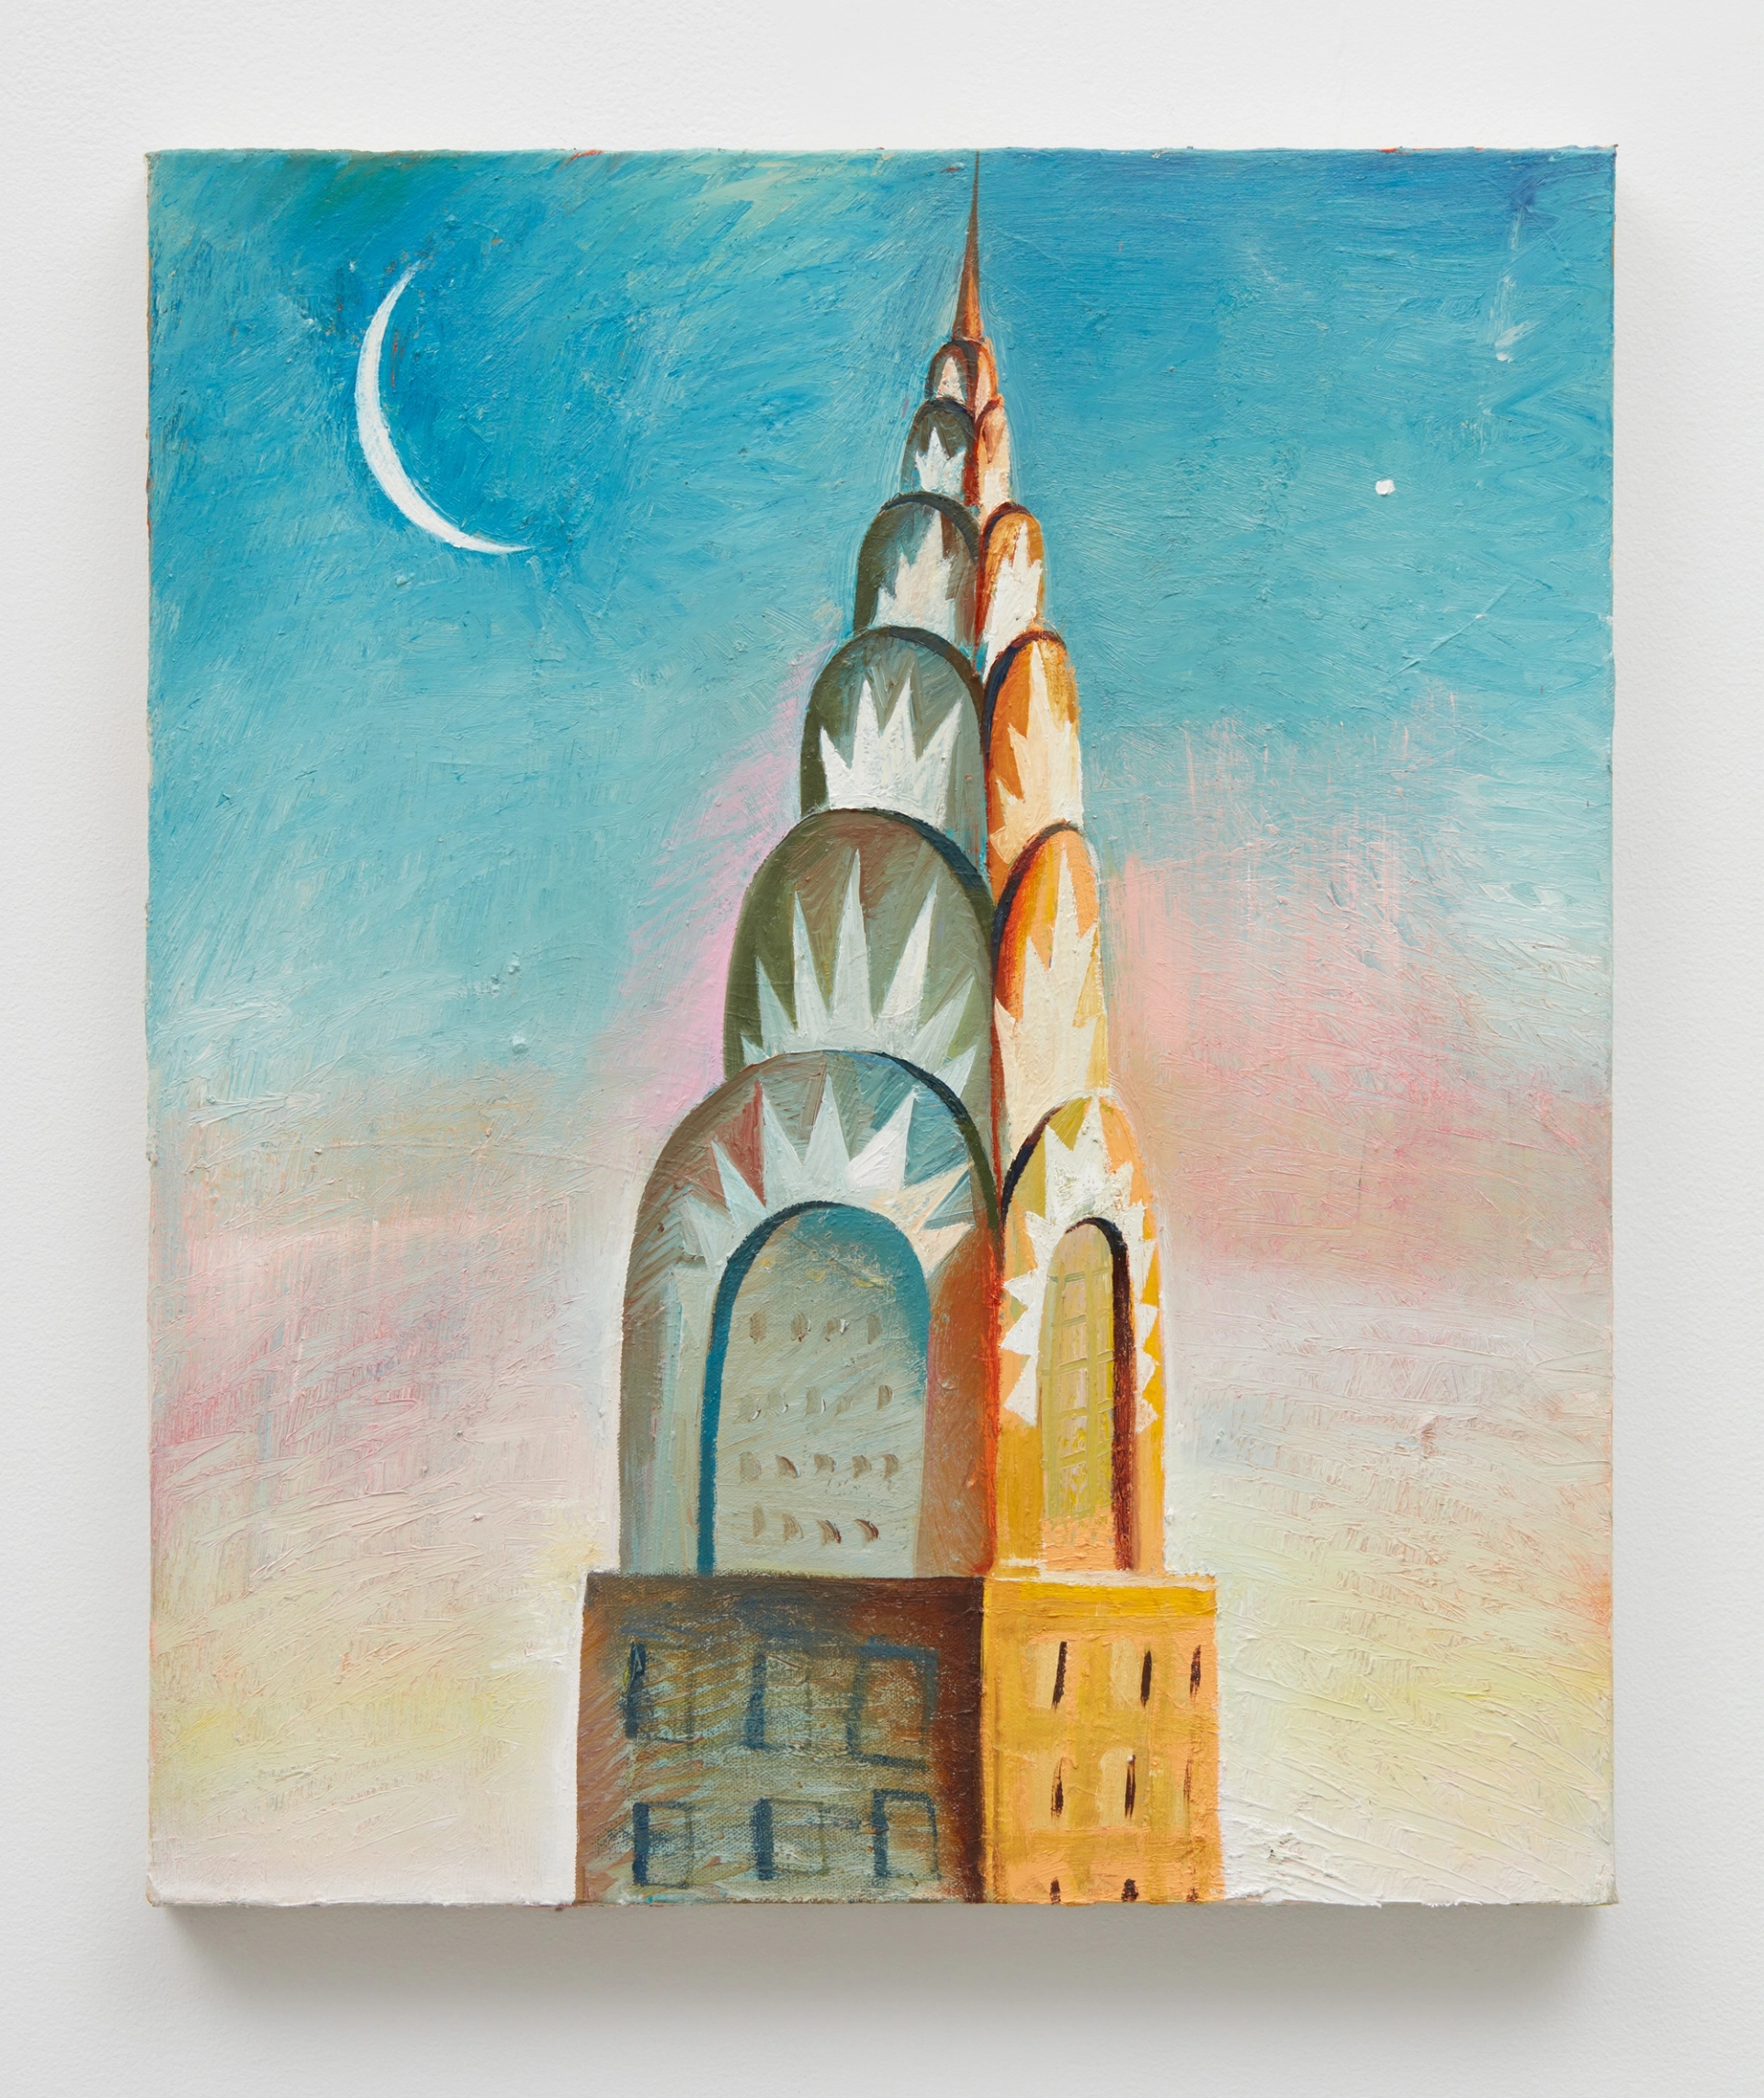 Louis Fratino, “Chrysler Building, Moon” (2019). Courtesy of the artist and Sikkema Jenkins & Co.